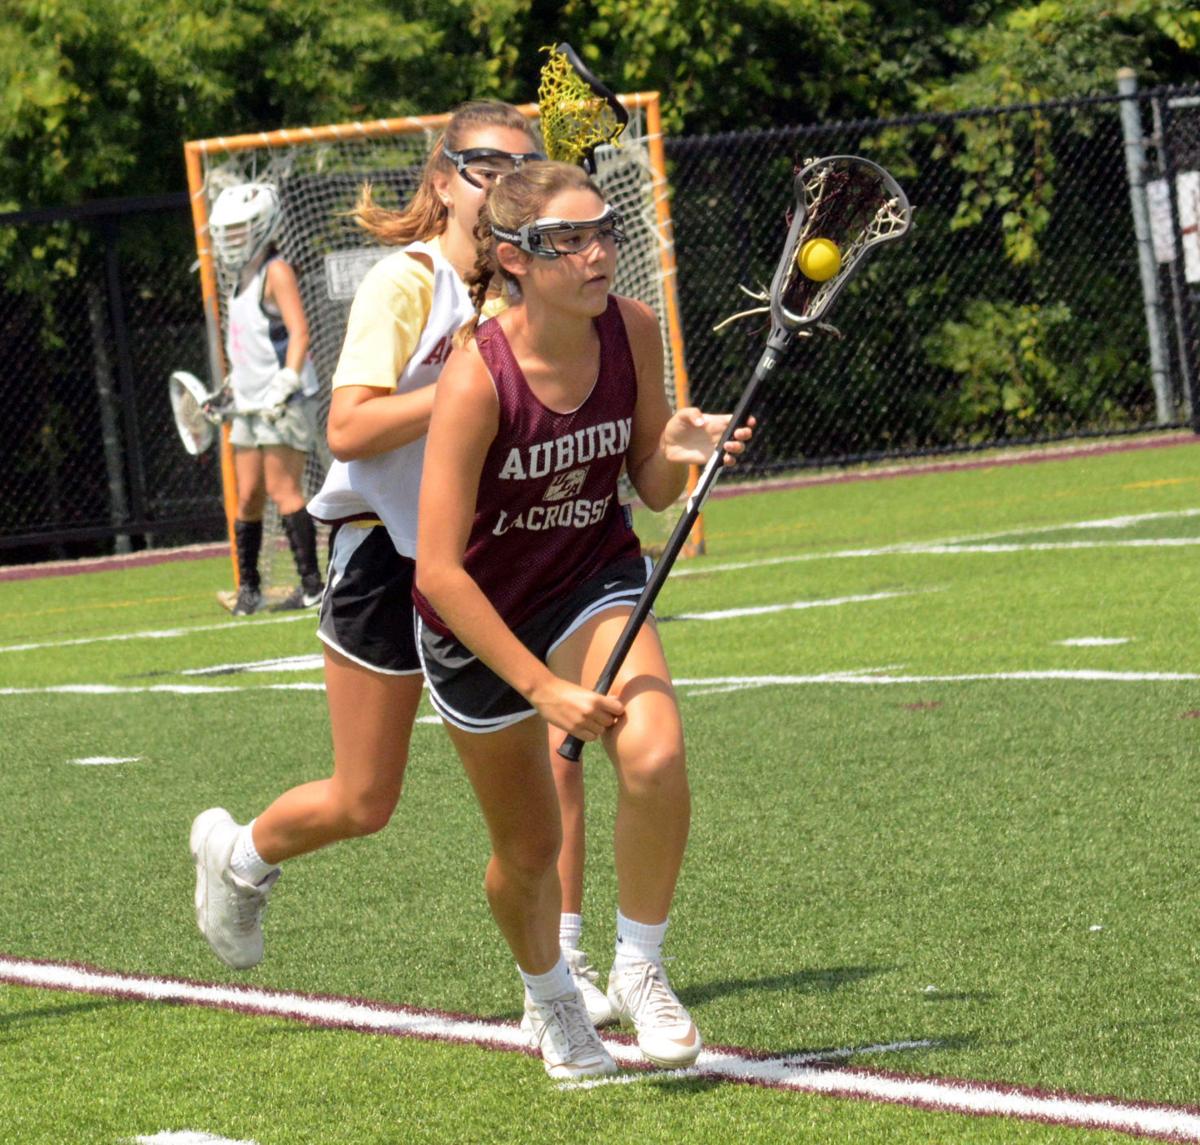 Auburn girls lacrosse continues busy summer with tournament, camp ...